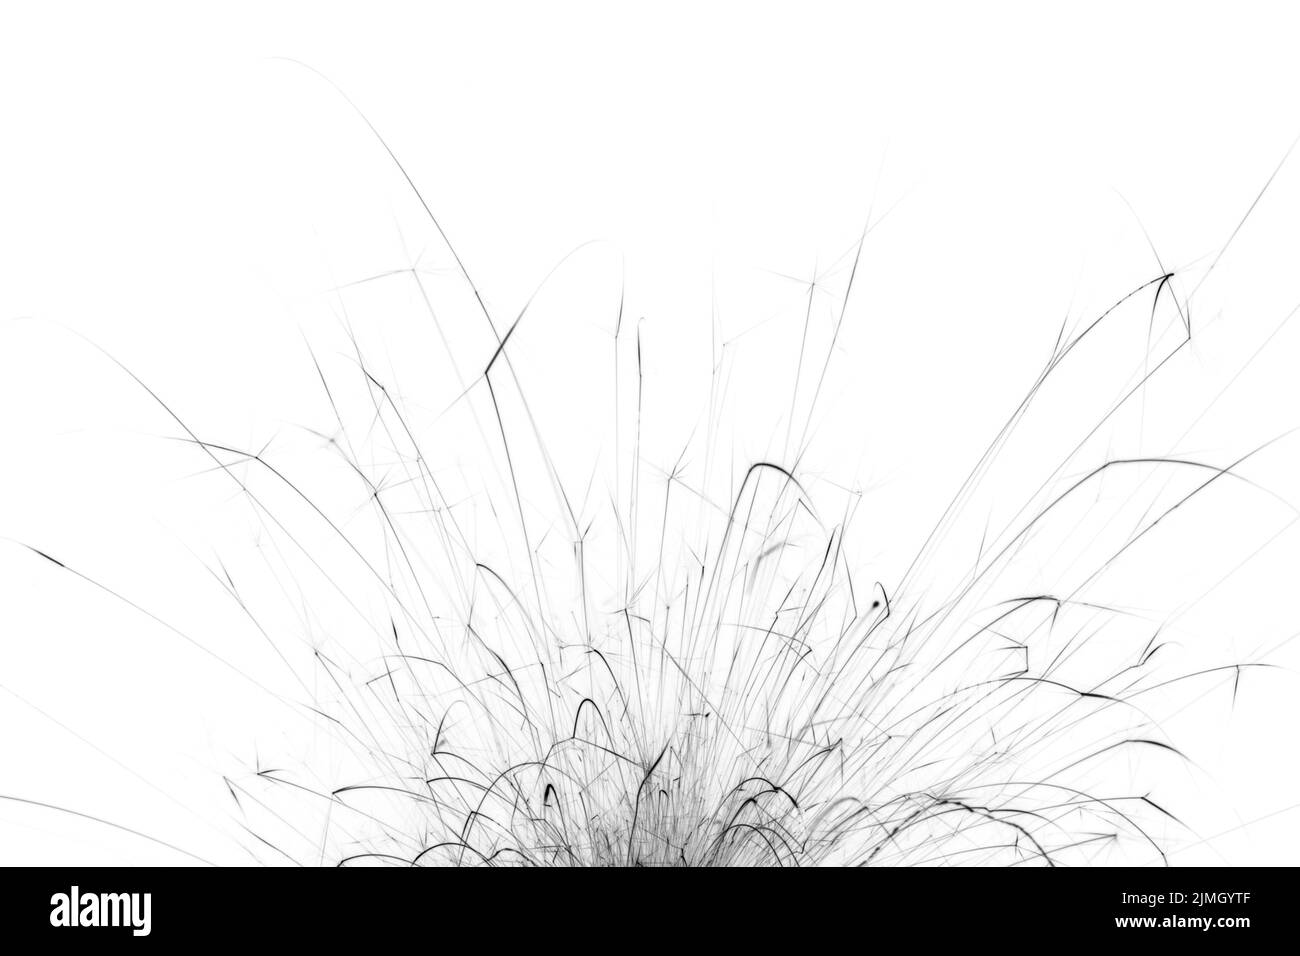 Black lines on a white background. Abstract monochrome photo of fireworks sparks. Stock Photo